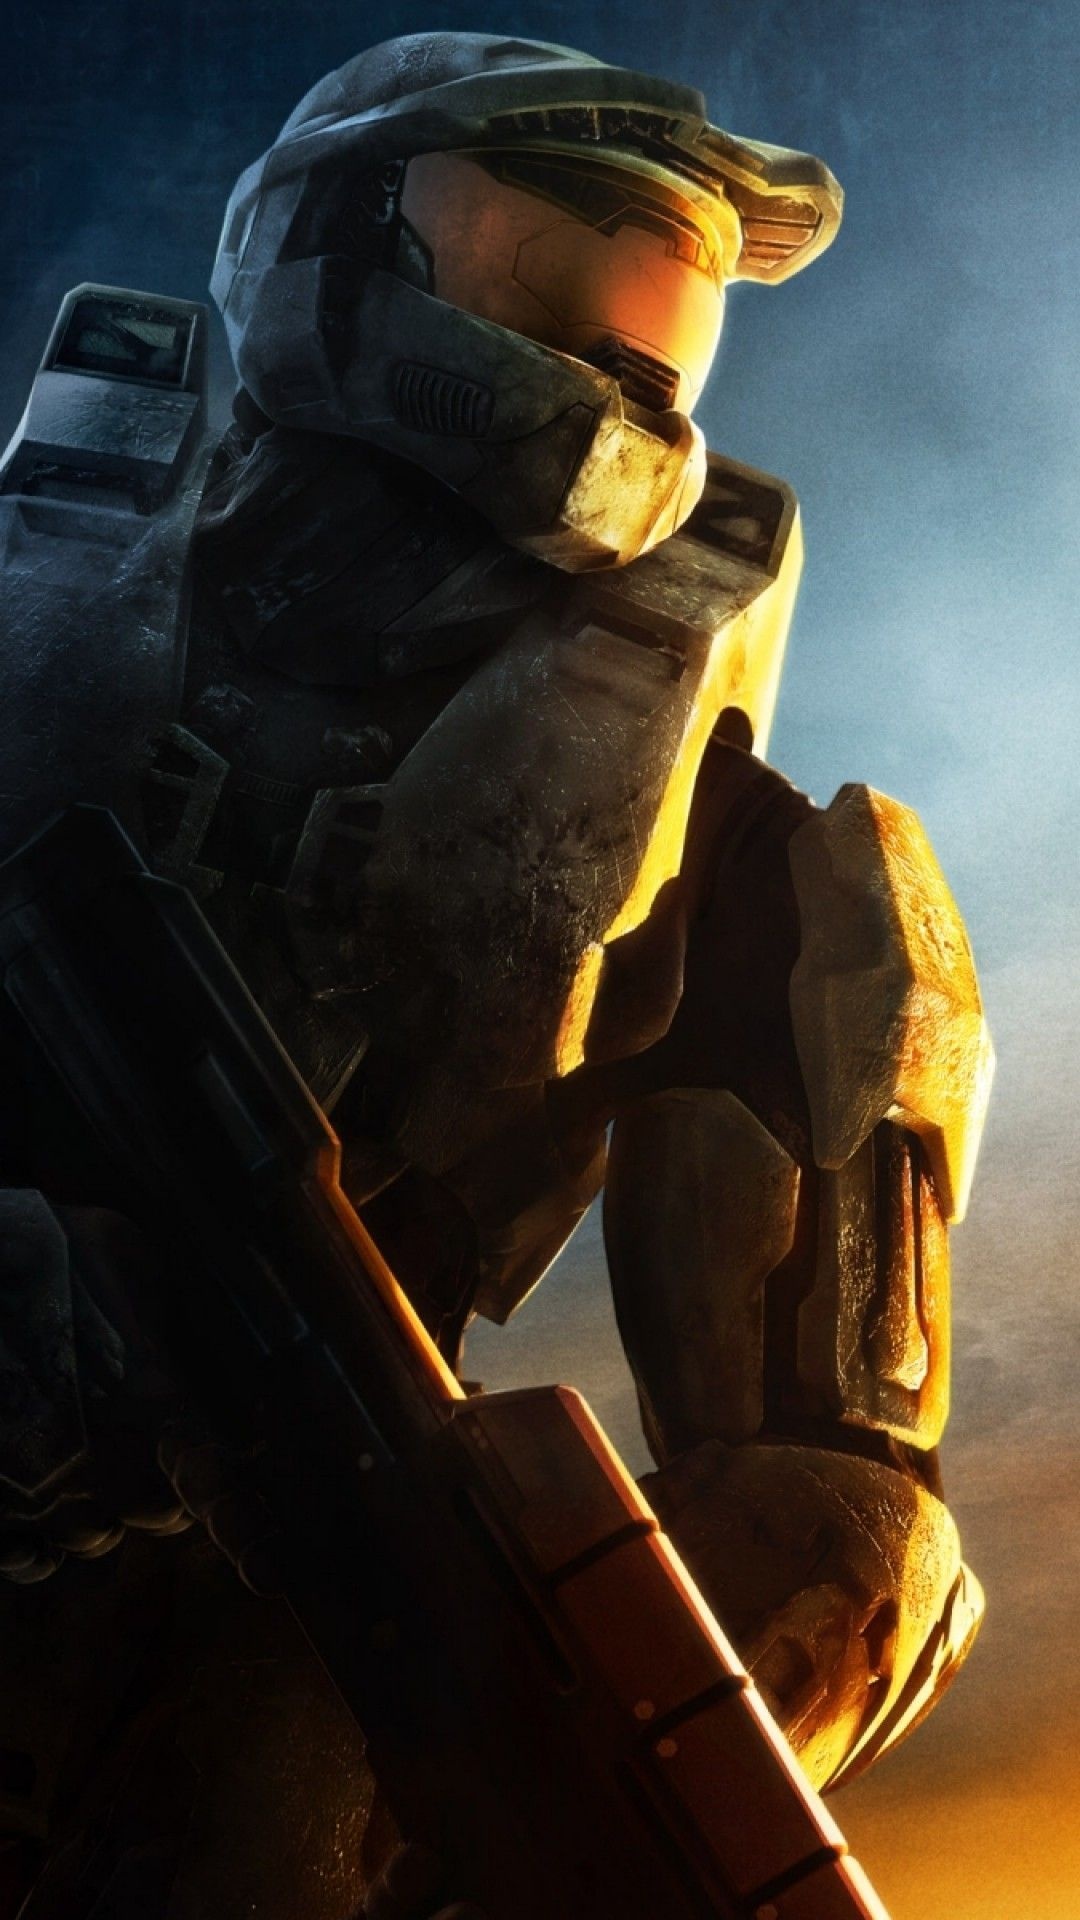 Halo 3 iPhone Wallpapers, Top free, 1080x1920 Full HD Phone